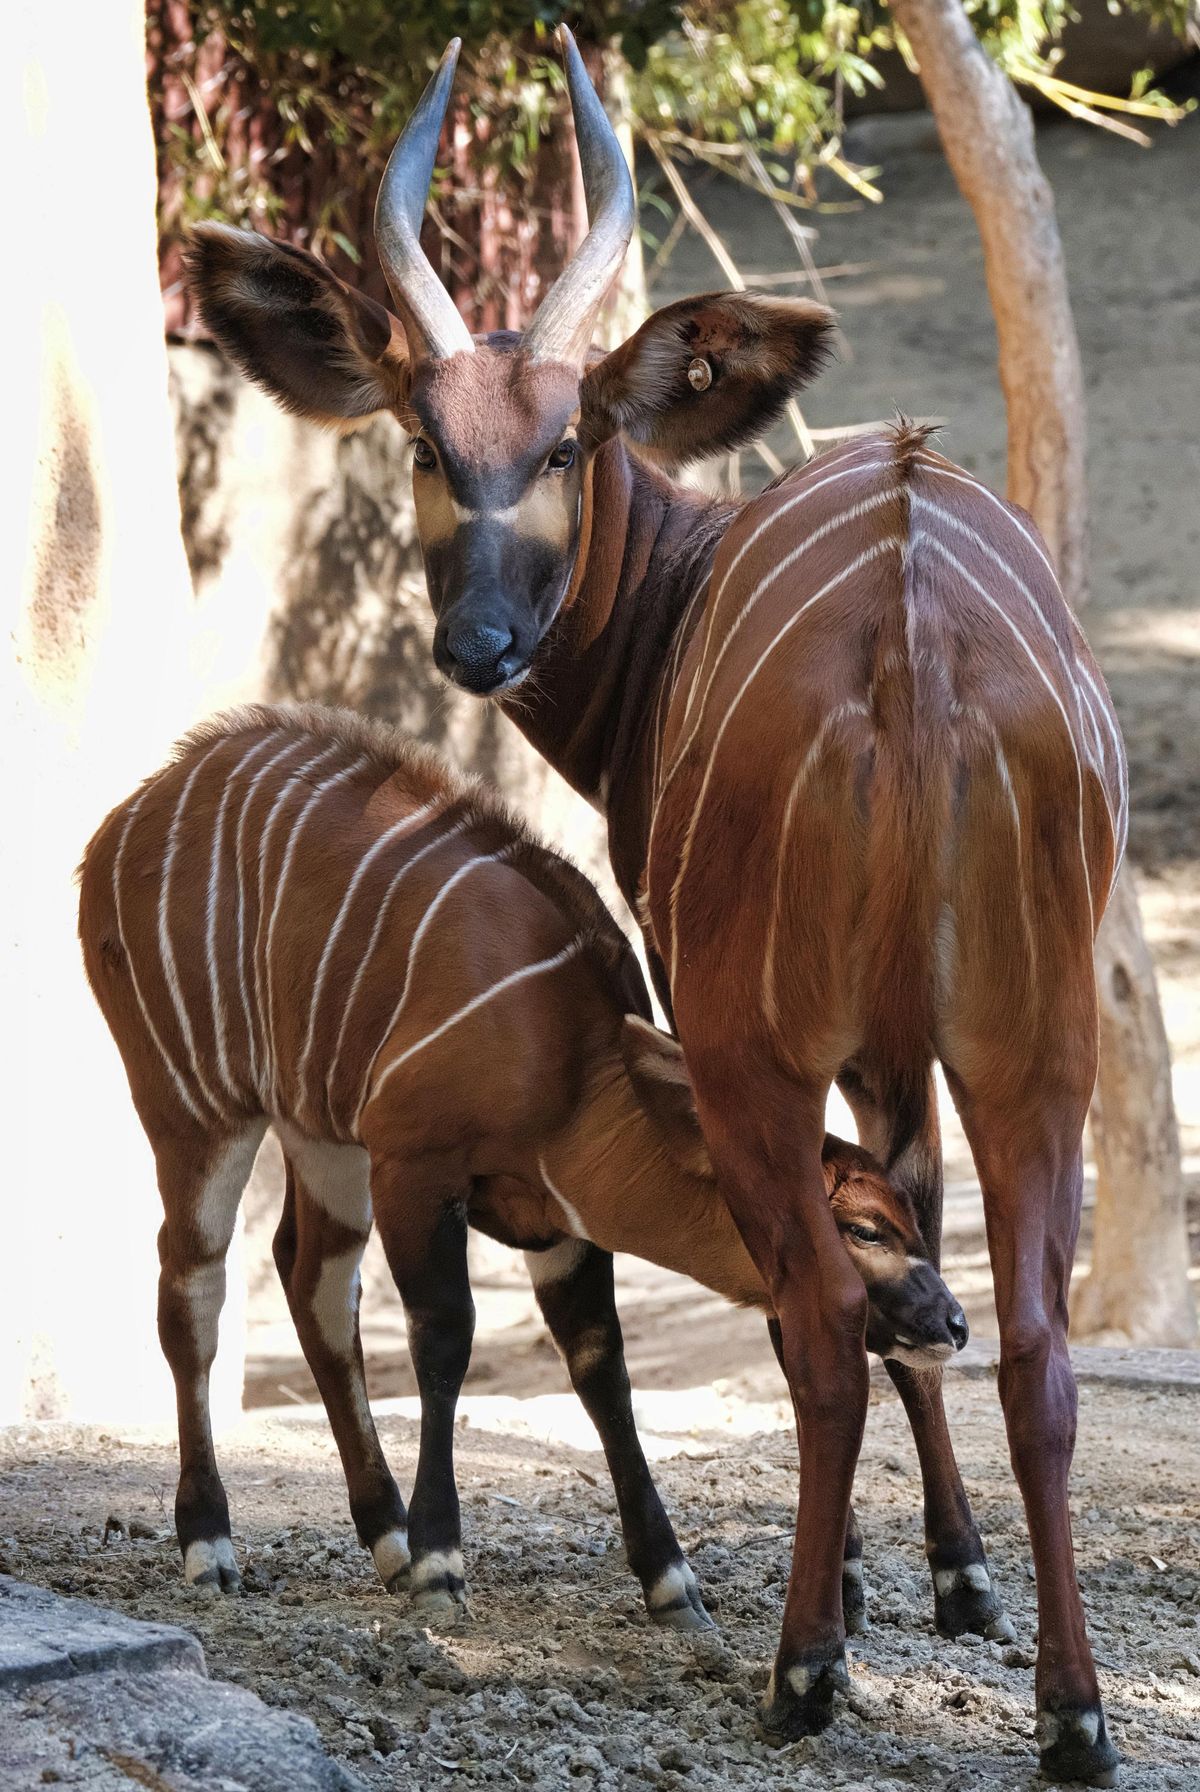 A male, Eastern bongo calf feeds from his mother on the day of his debut at the Los Angeles Zoo on Thursday, Feb. 23, 2107. The unnamed male a type of antelope found in Kenya, was born at the zoo on Jan. 20. It spent time bonding with its mother behind the scenes before being introduced to the public on Thursday. (Richard Vogel / Associated Press)